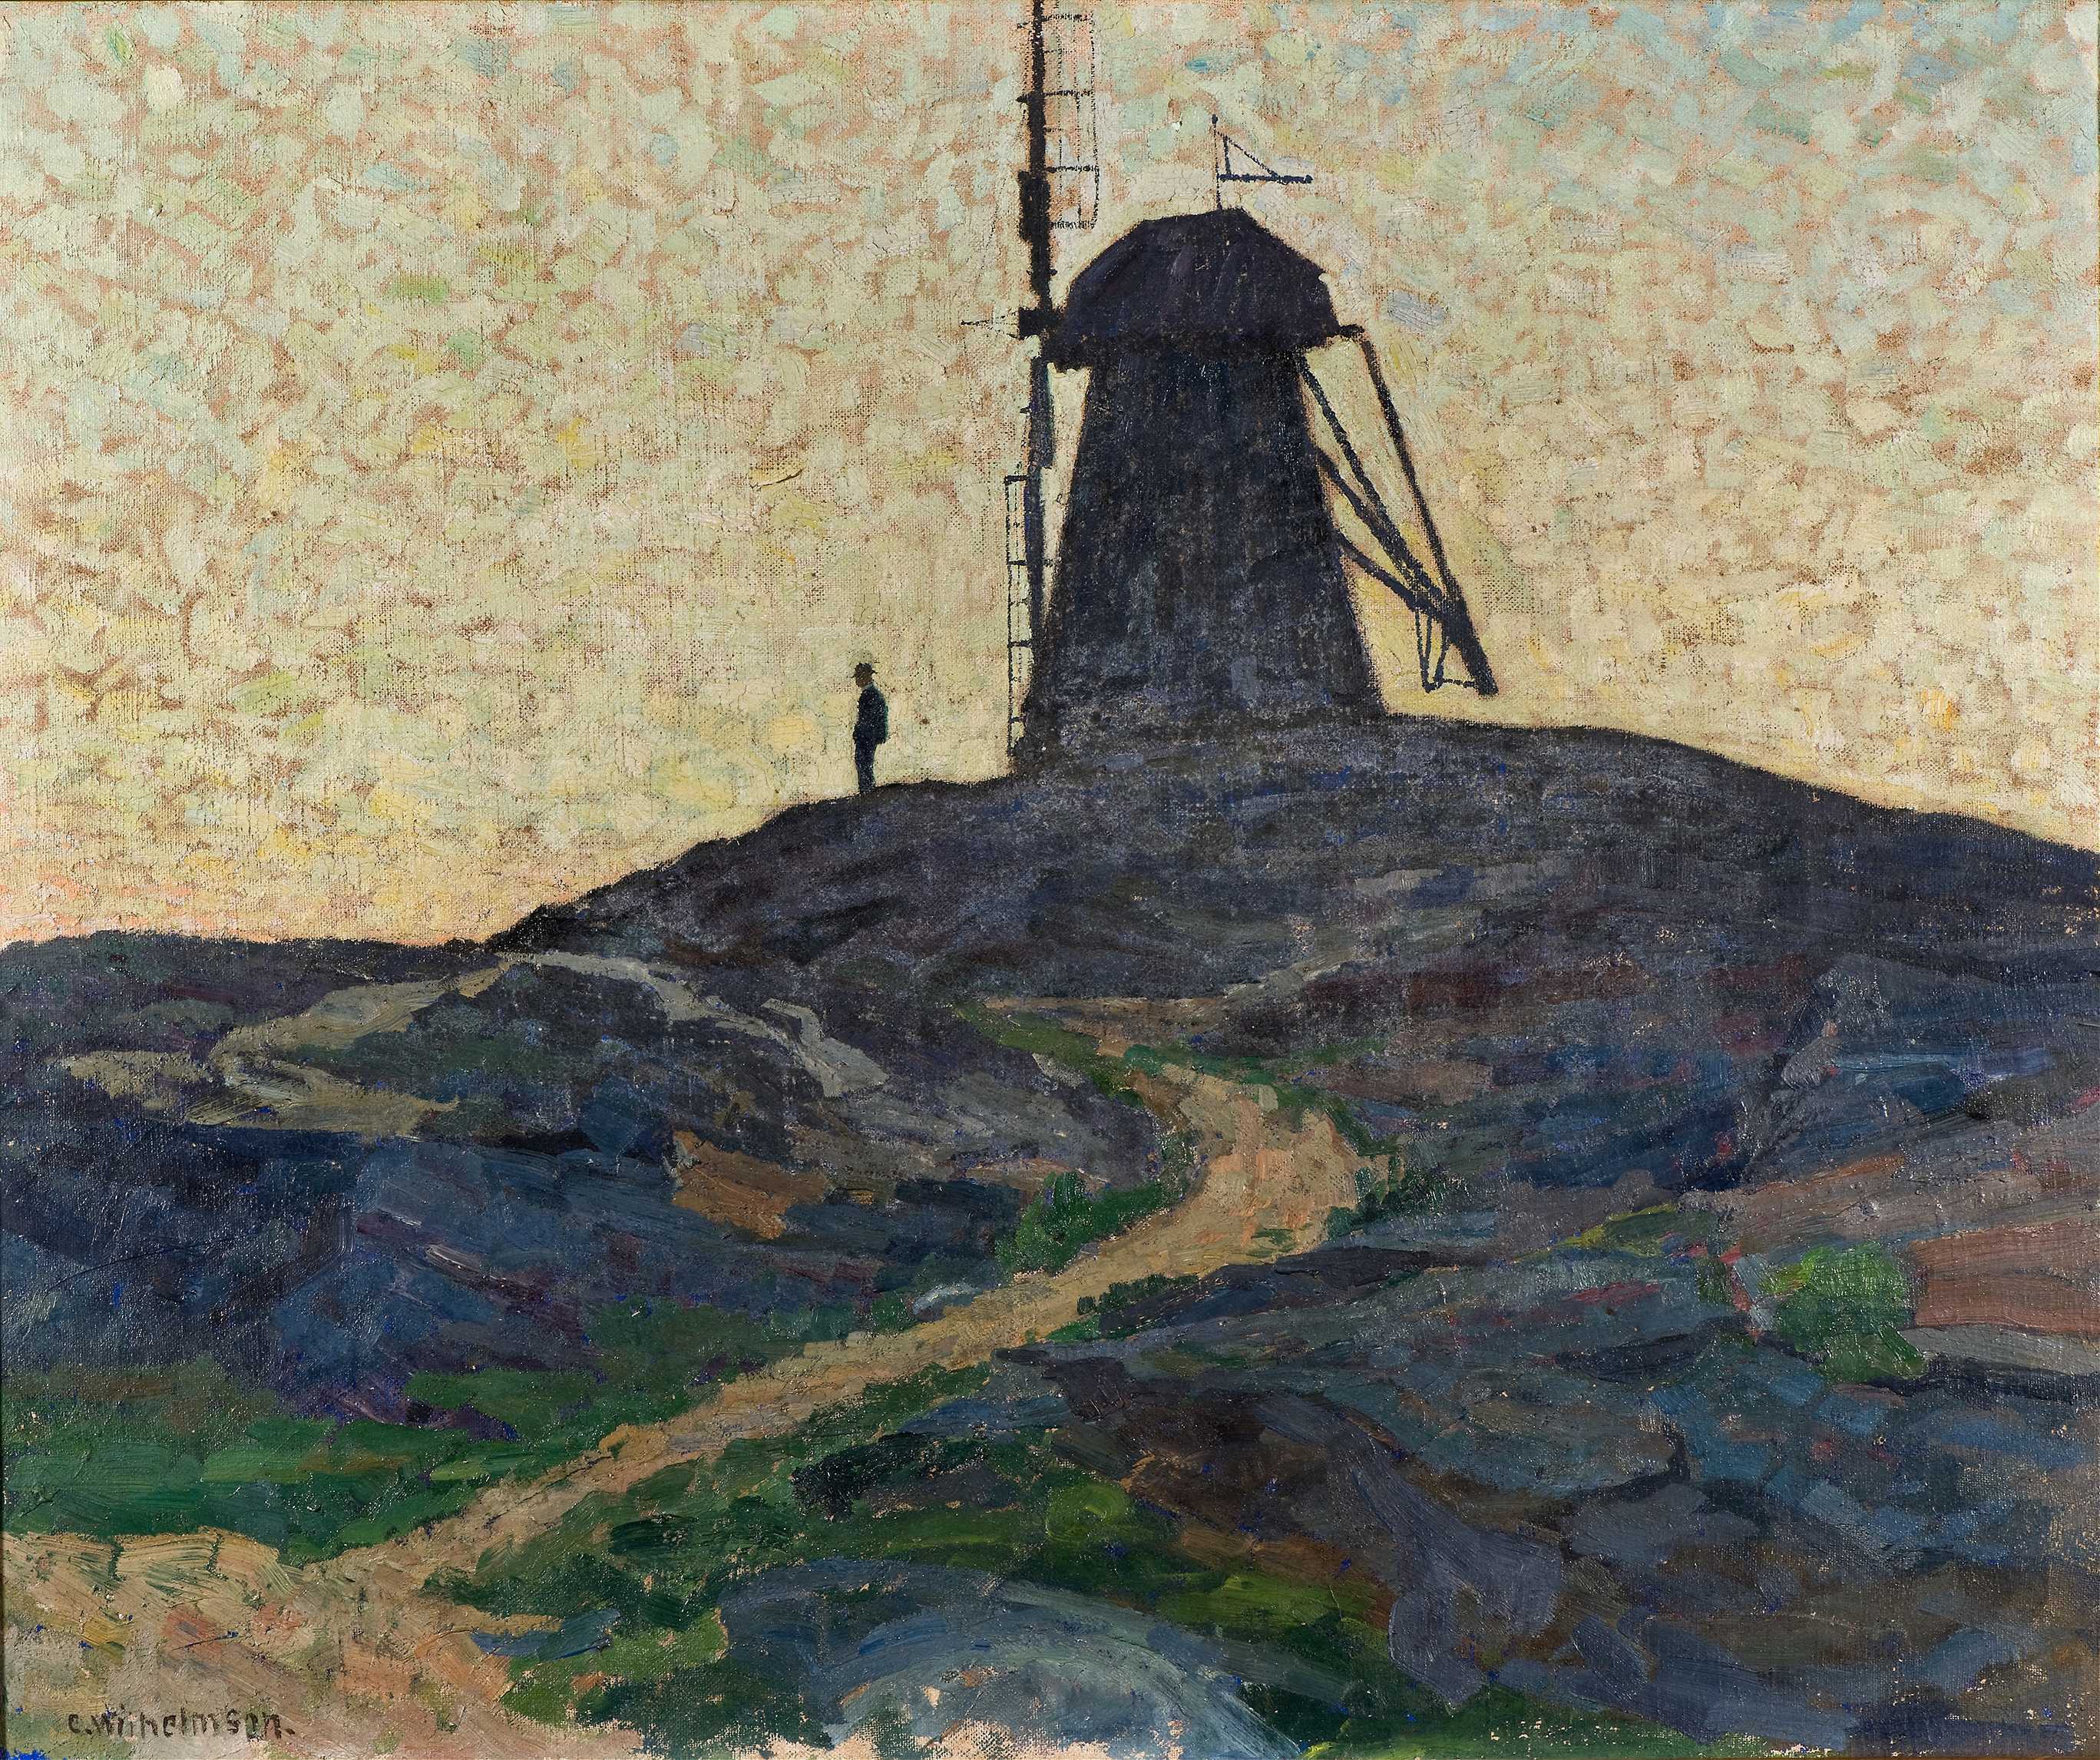 Find out more about Carl Wilhelmson - The Windmill